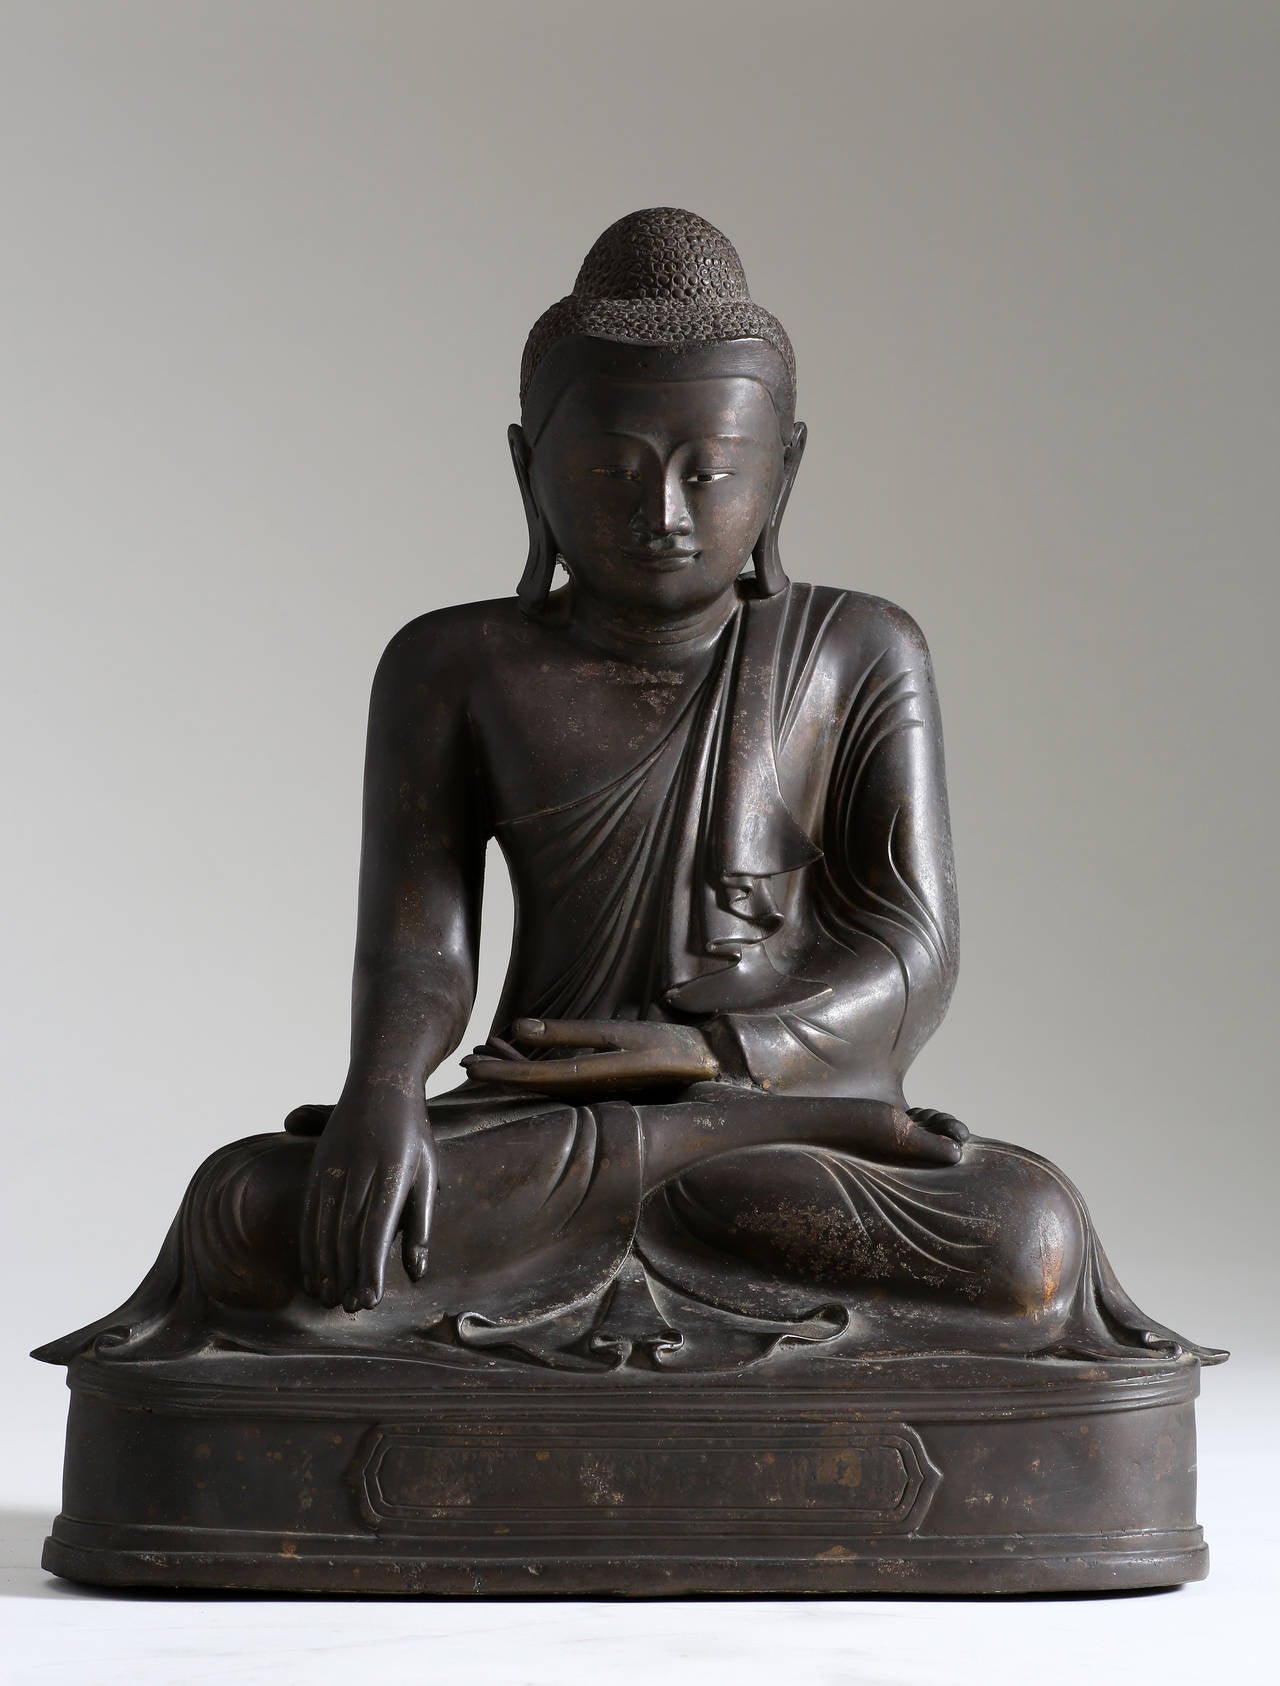 The Buddha is seated on a low base in vajrasana with bhumisparshamudra, in which the finger-tips of the right hand touch the earth to symbolize the moment of enlightenment. The Buddha is clothed in simple monk’s robe with billowing folds of fabric.